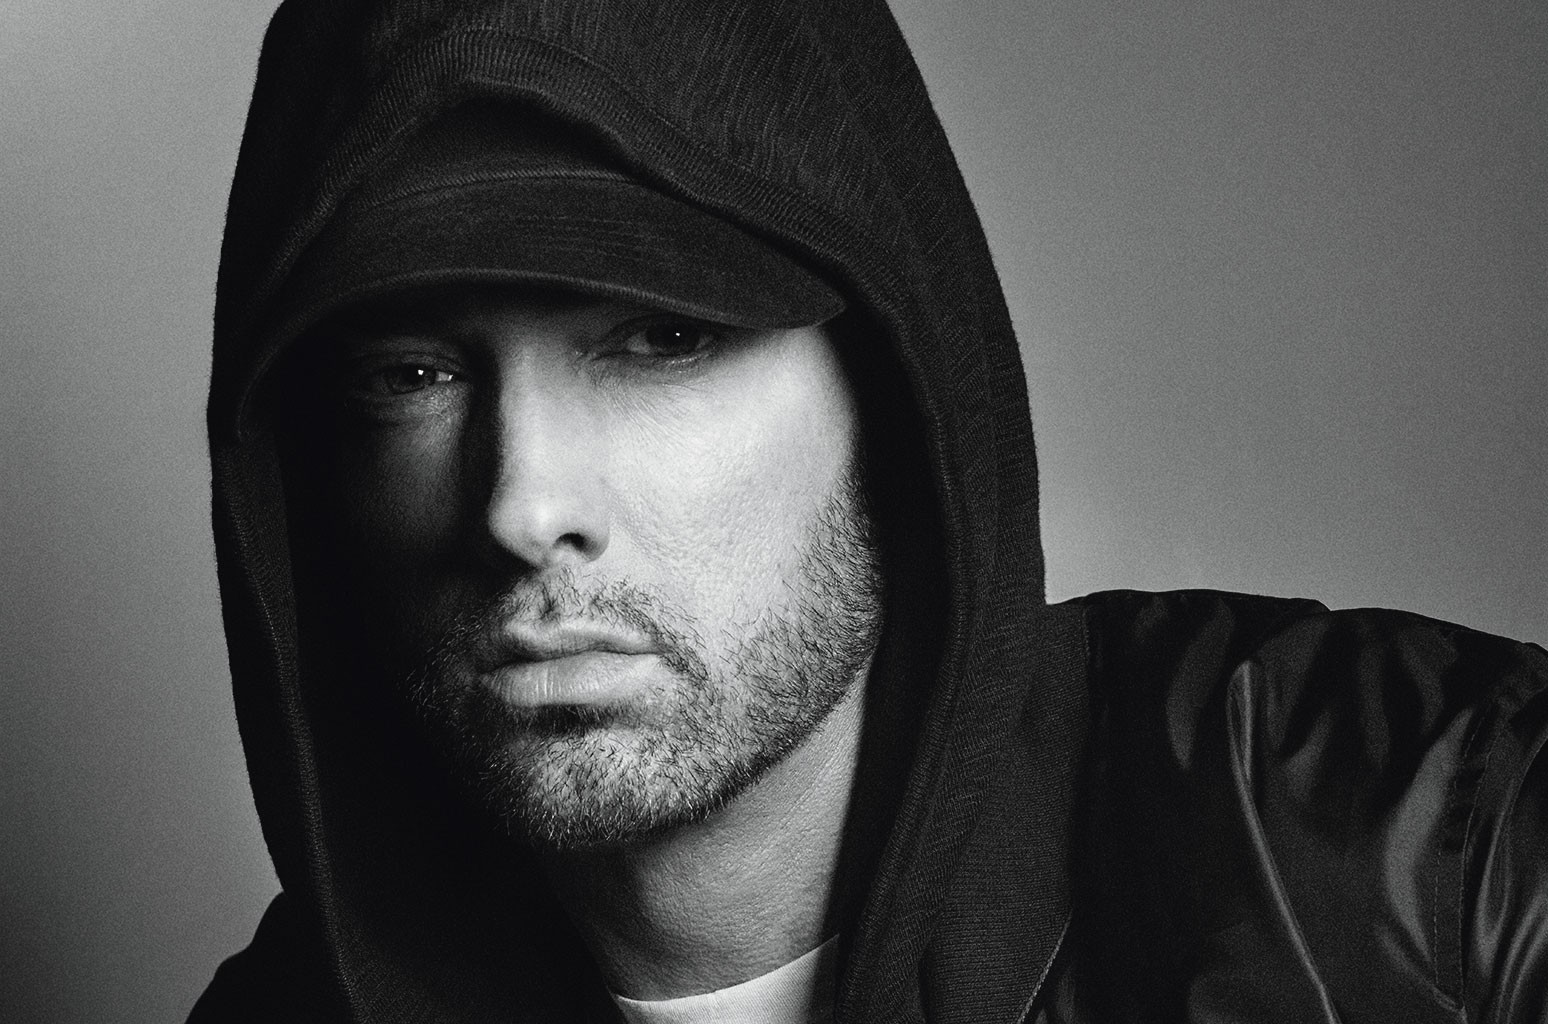 Eminem Wiki, Bio, Age, Net Worth, and Other Facts